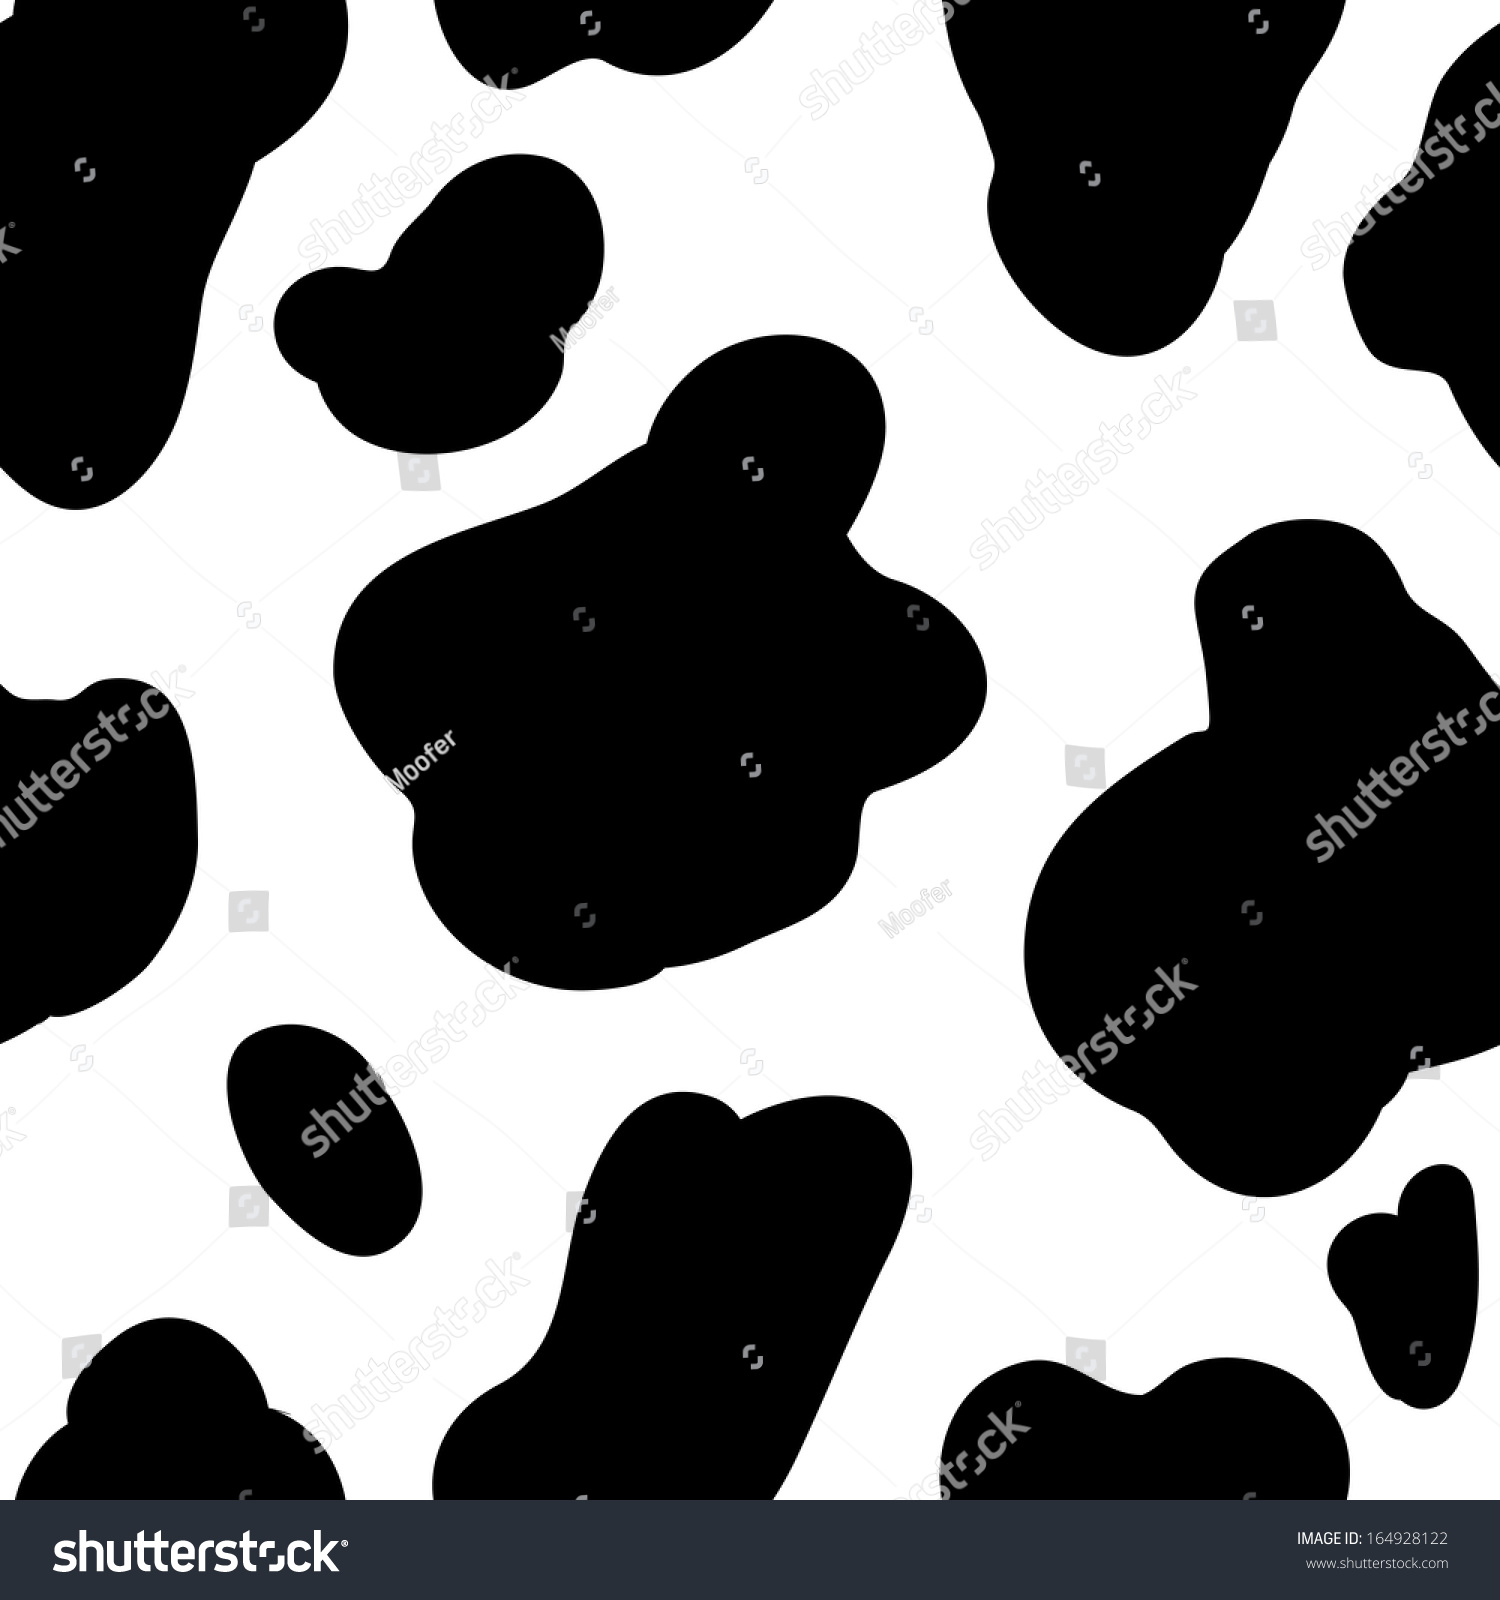 cow pattern clipart - photo #17